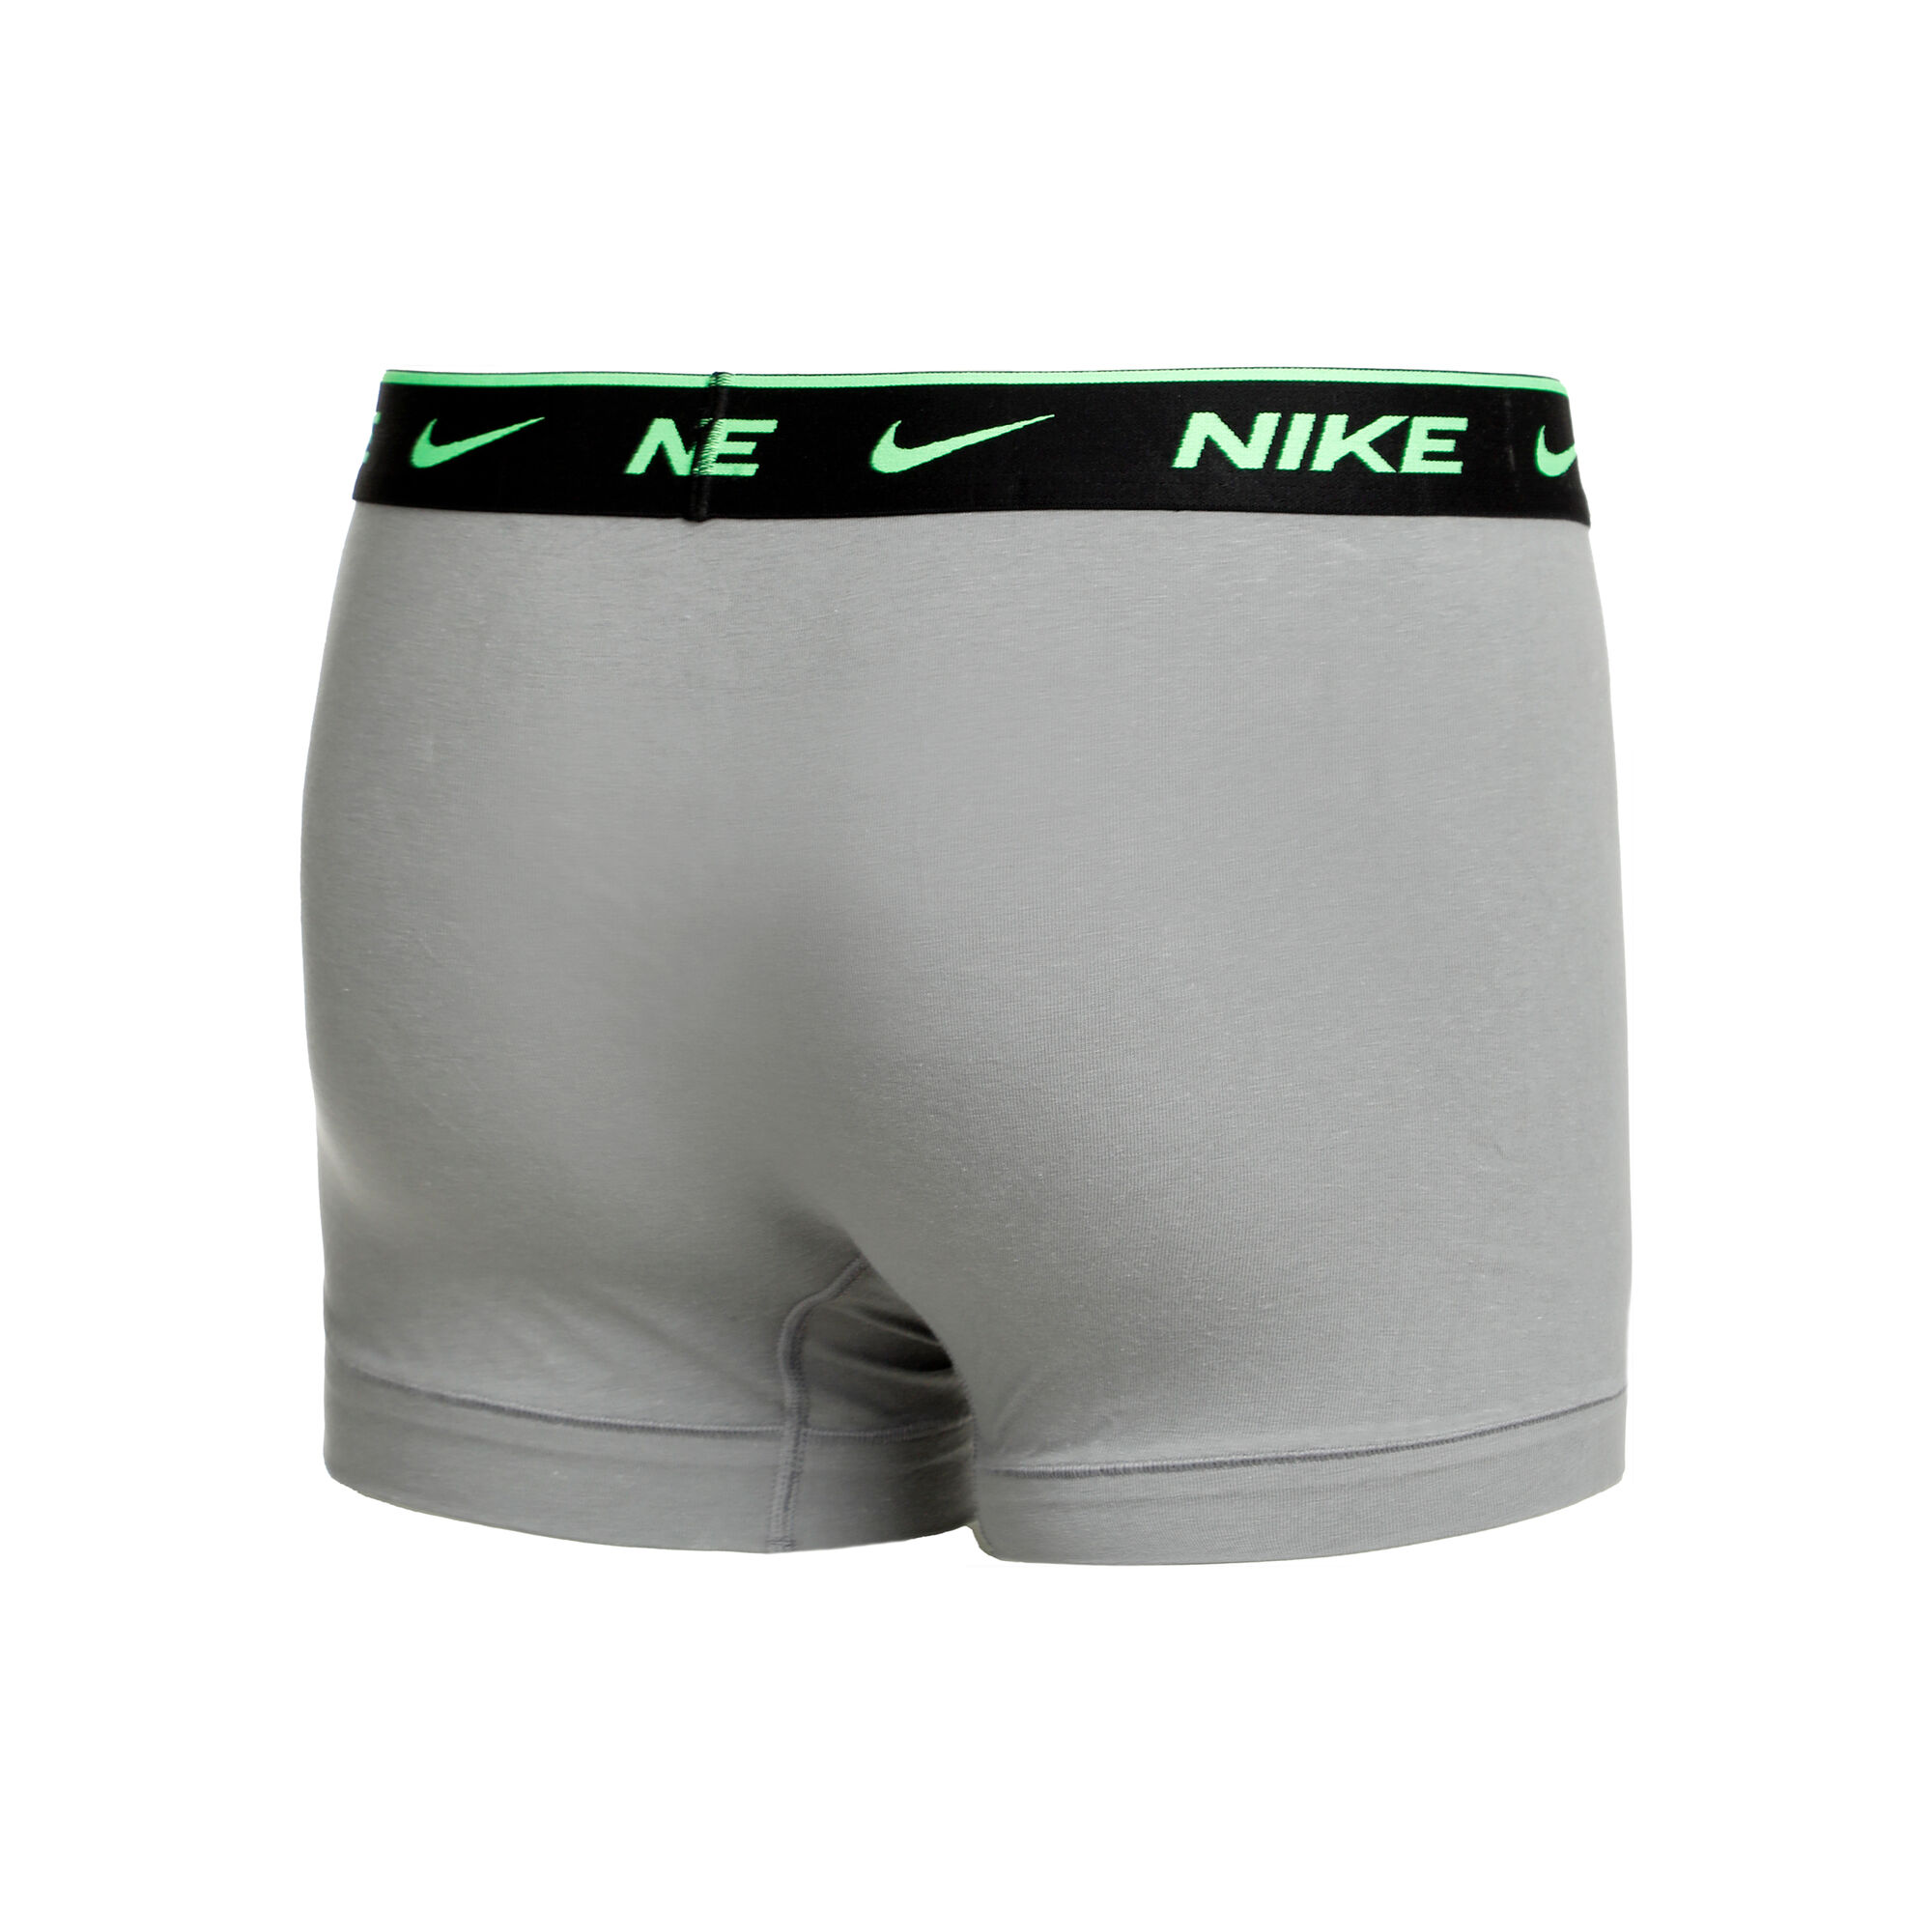 Buy Nike Everyday Cotton Stretch Trunk Boxer Shorts 3 Pack Men Grey, Neon  Green online